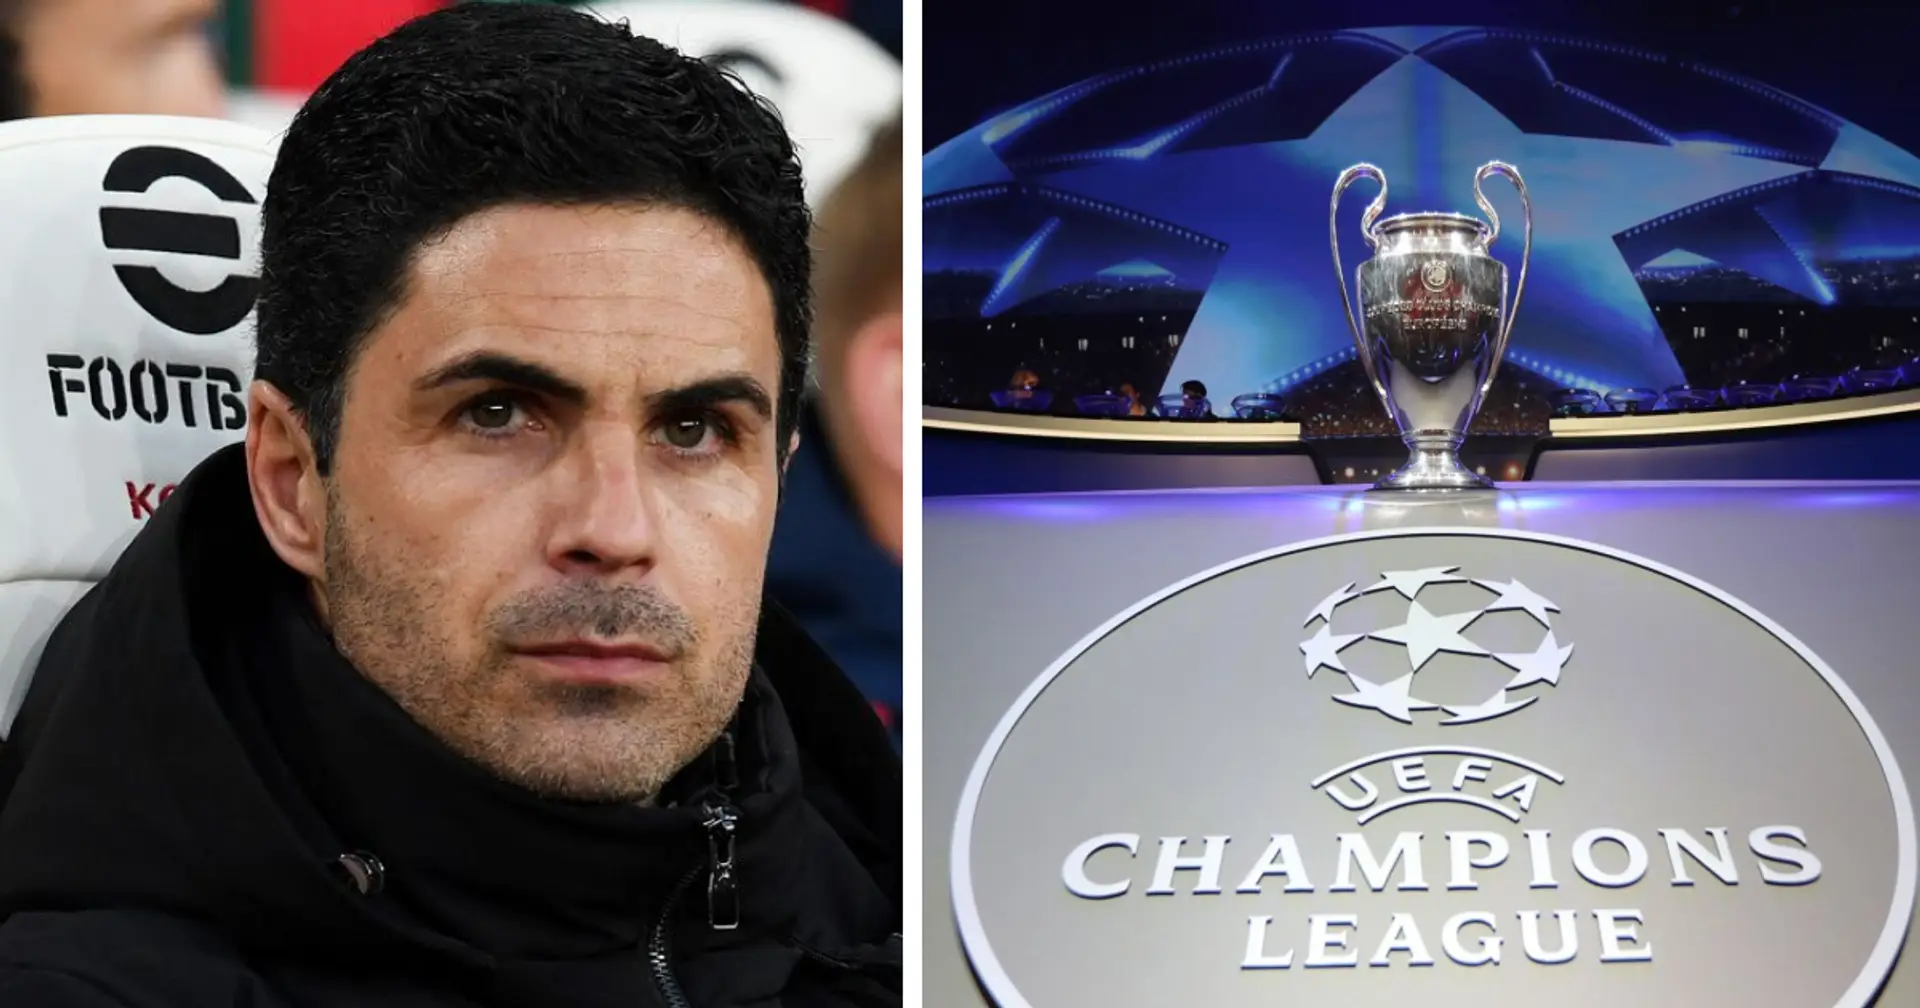 Mikel Arteta states that Arsenal reached the main target, but it wasn't enough